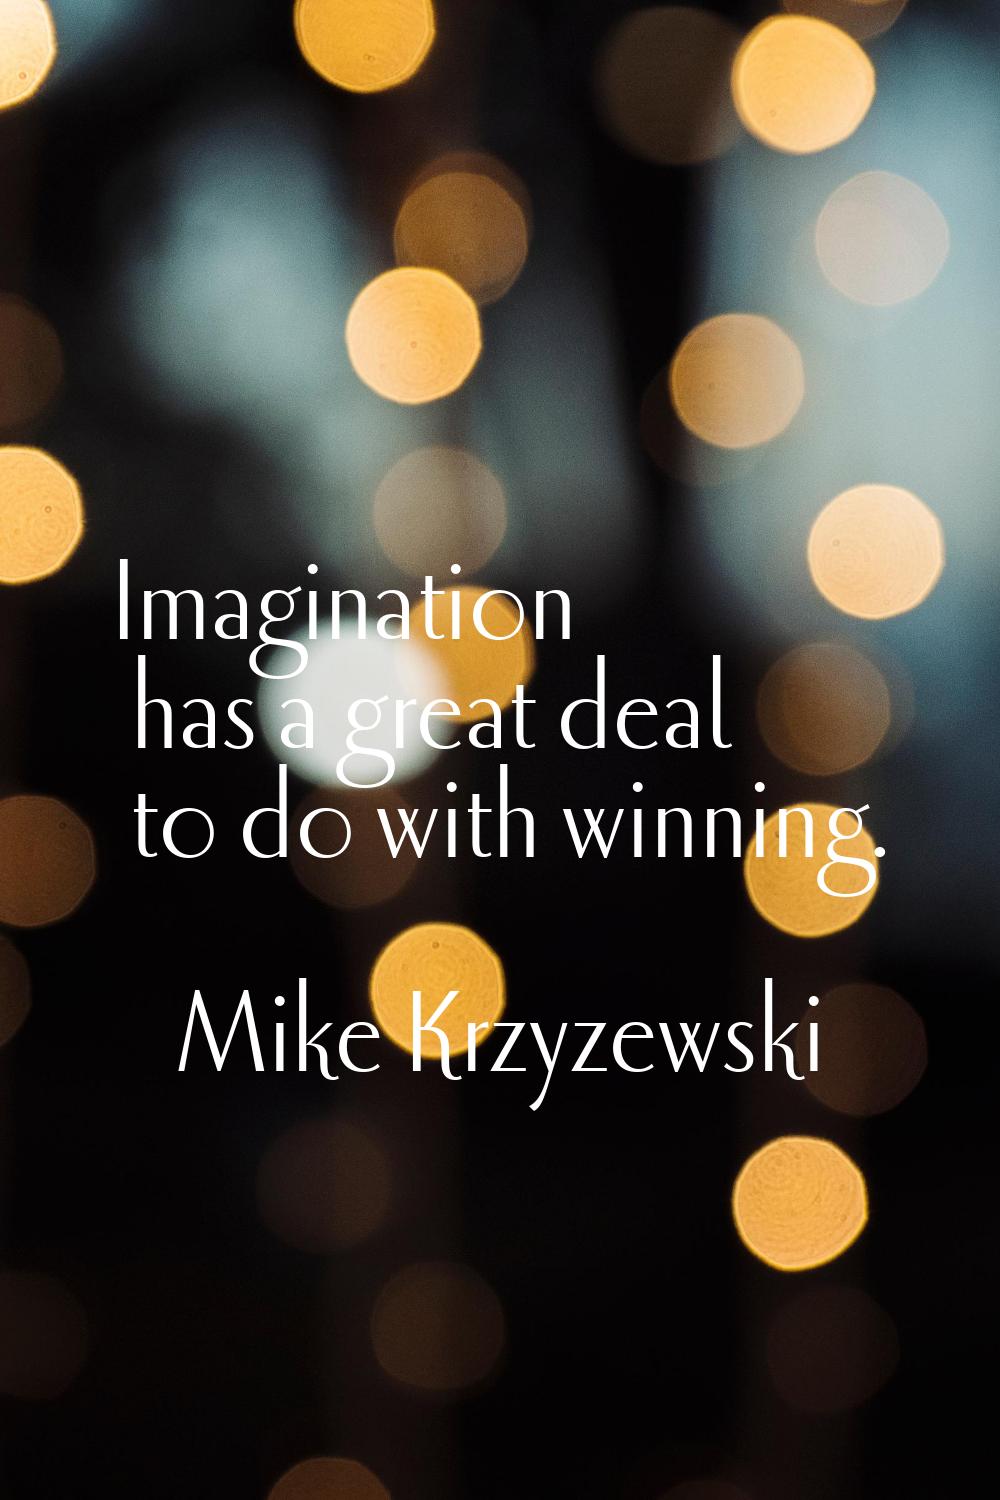 Imagination has a great deal to do with winning.